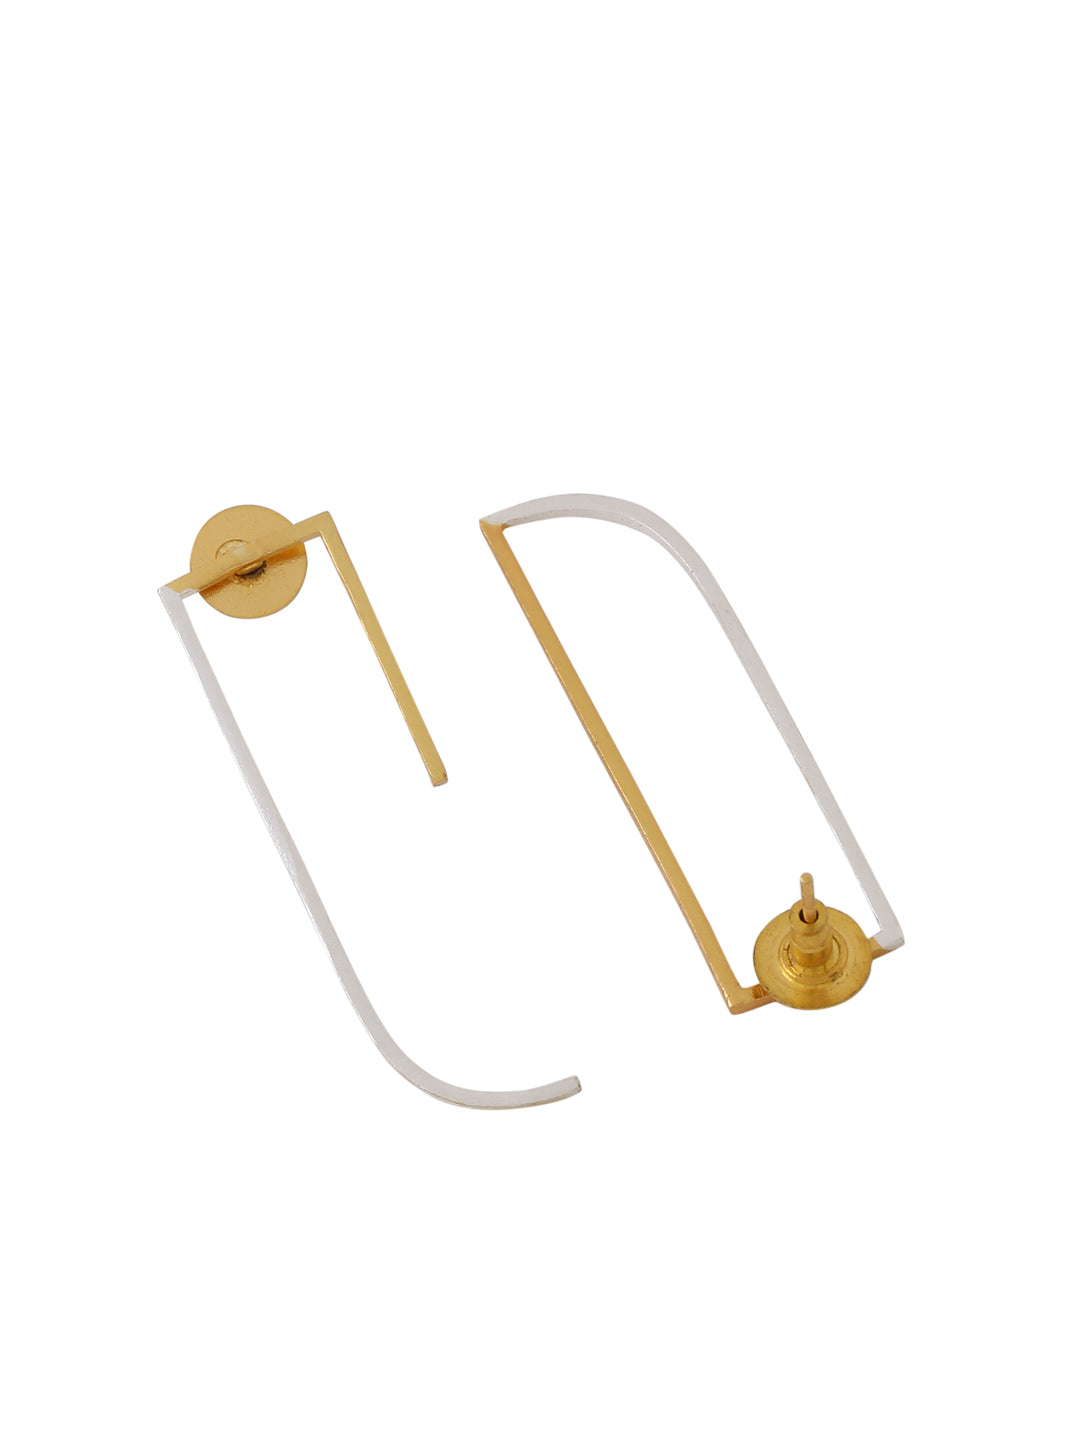 Partial Earrings - Gold/Silver